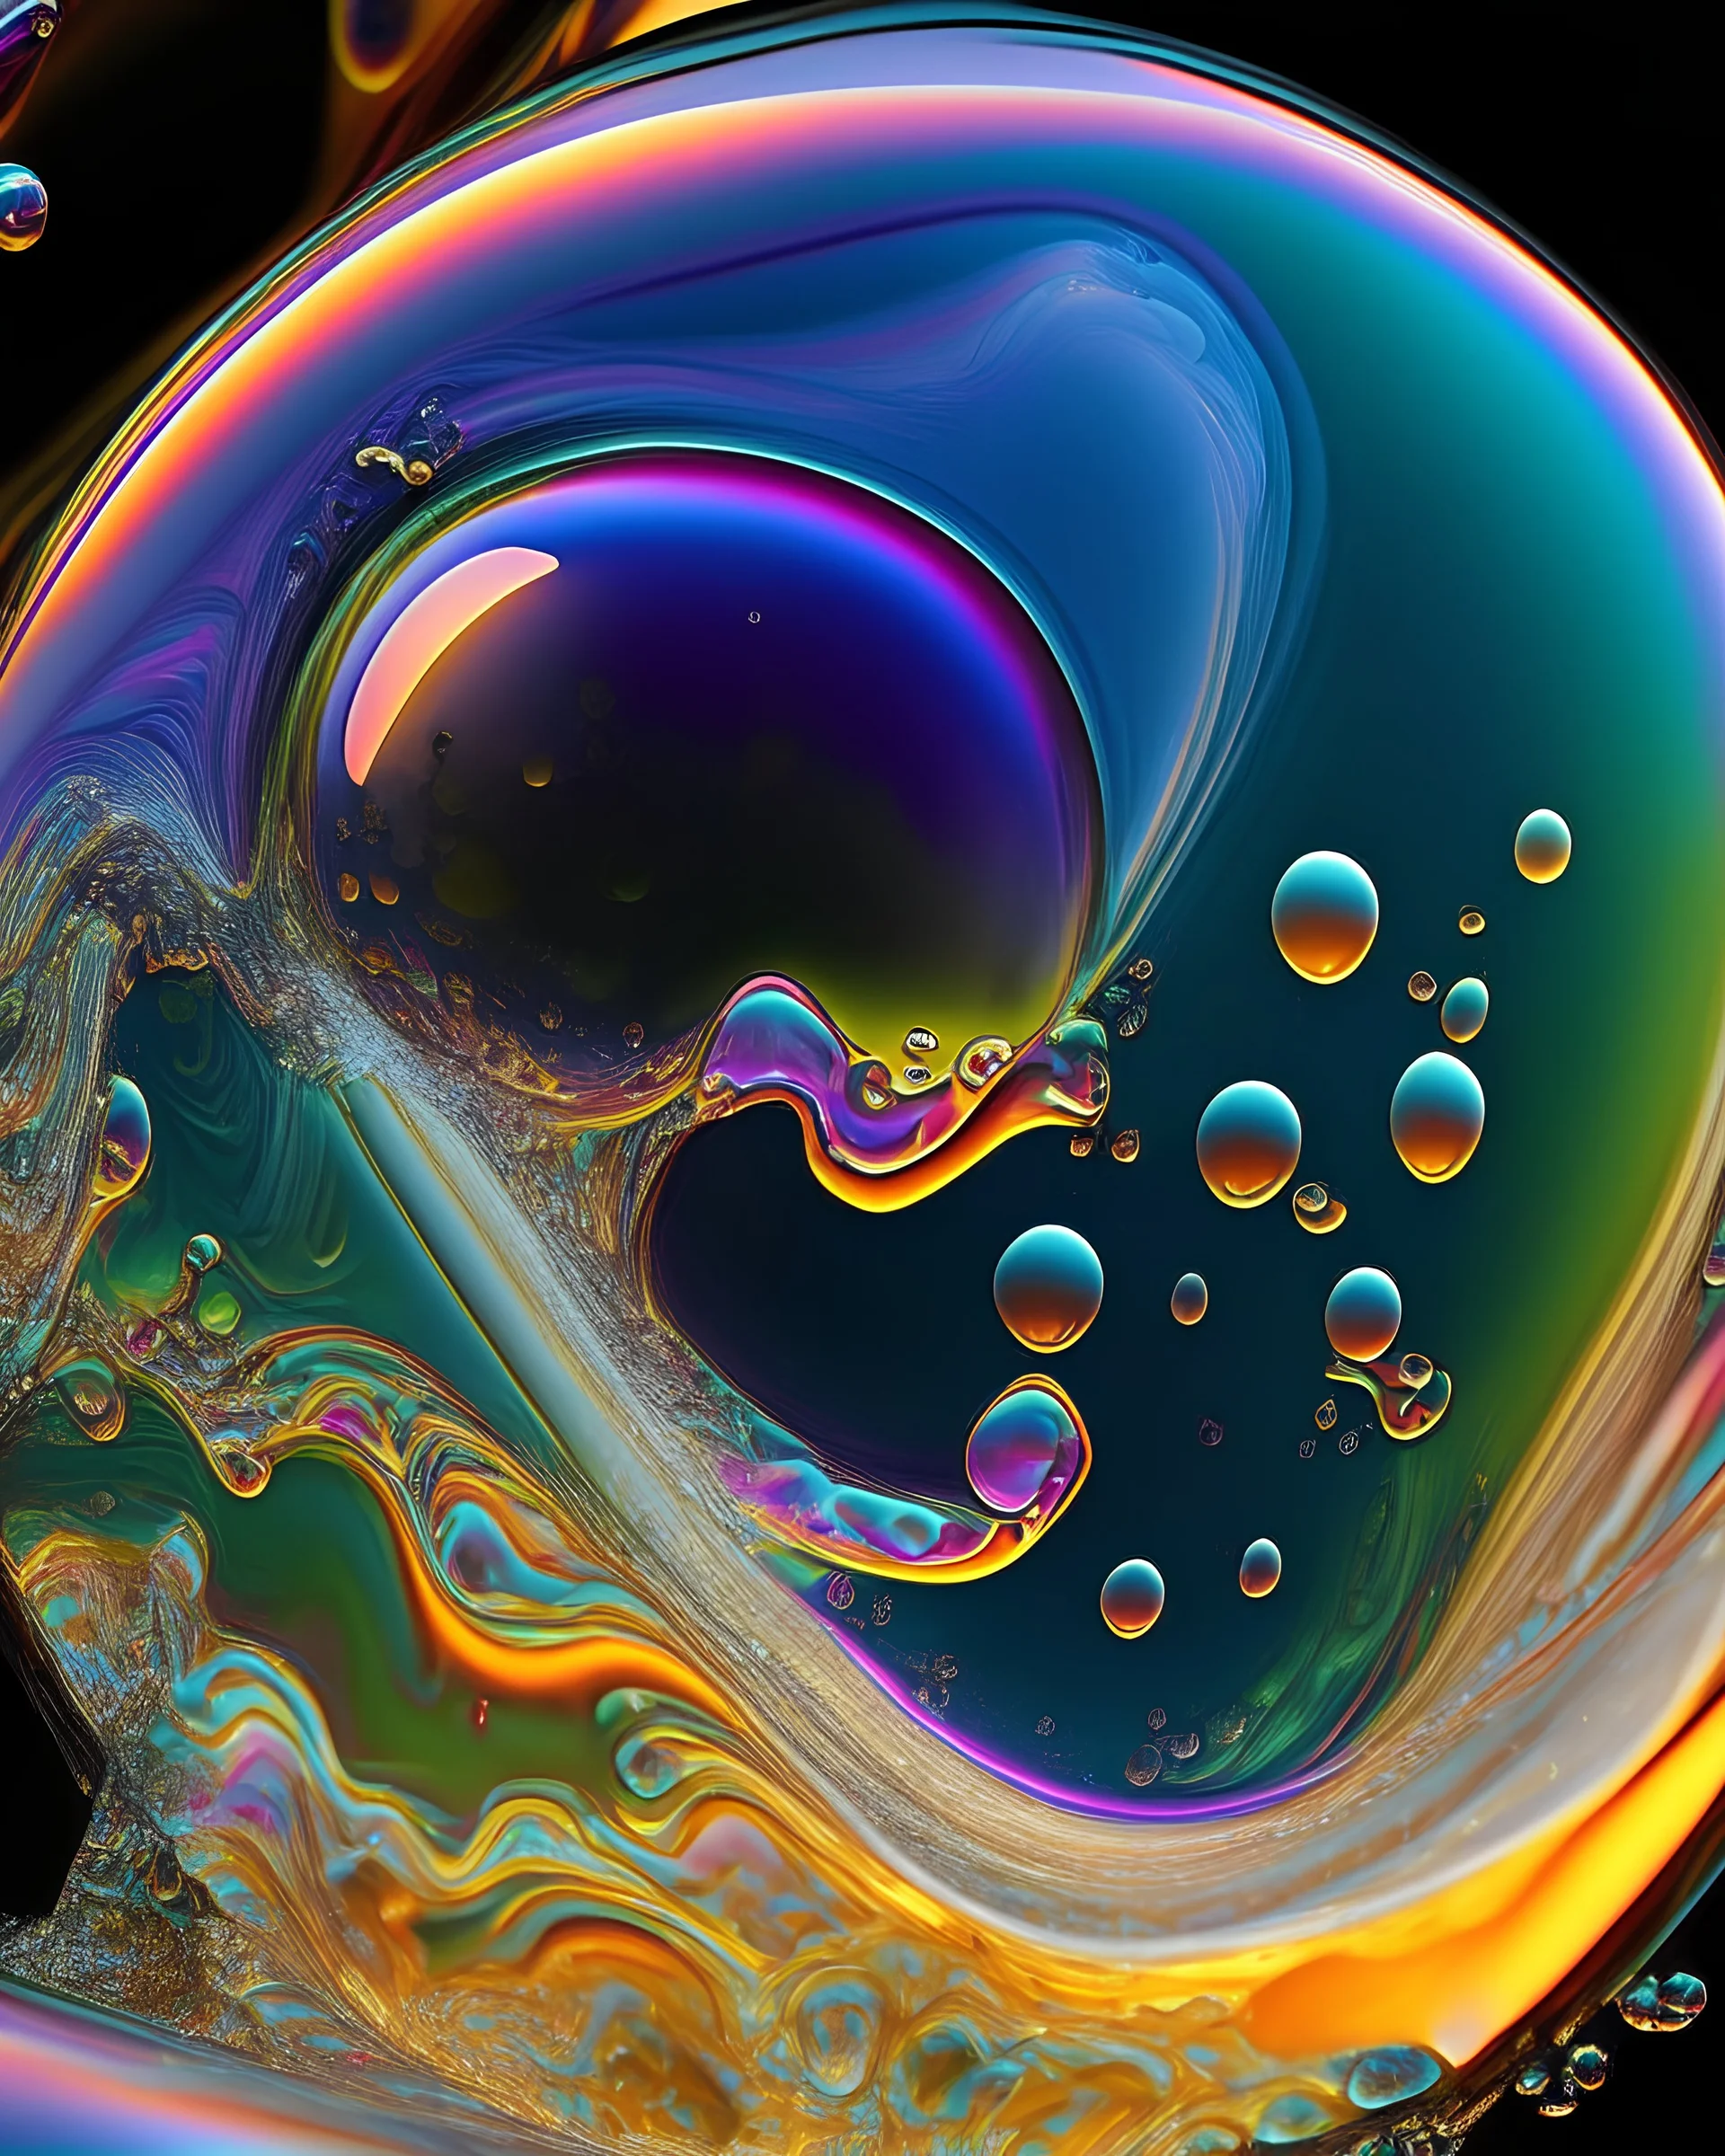 The swirling, vibrant colors and patterns of a soap bubble, with a detailed view of the thin film and the light reflecting off its surface.